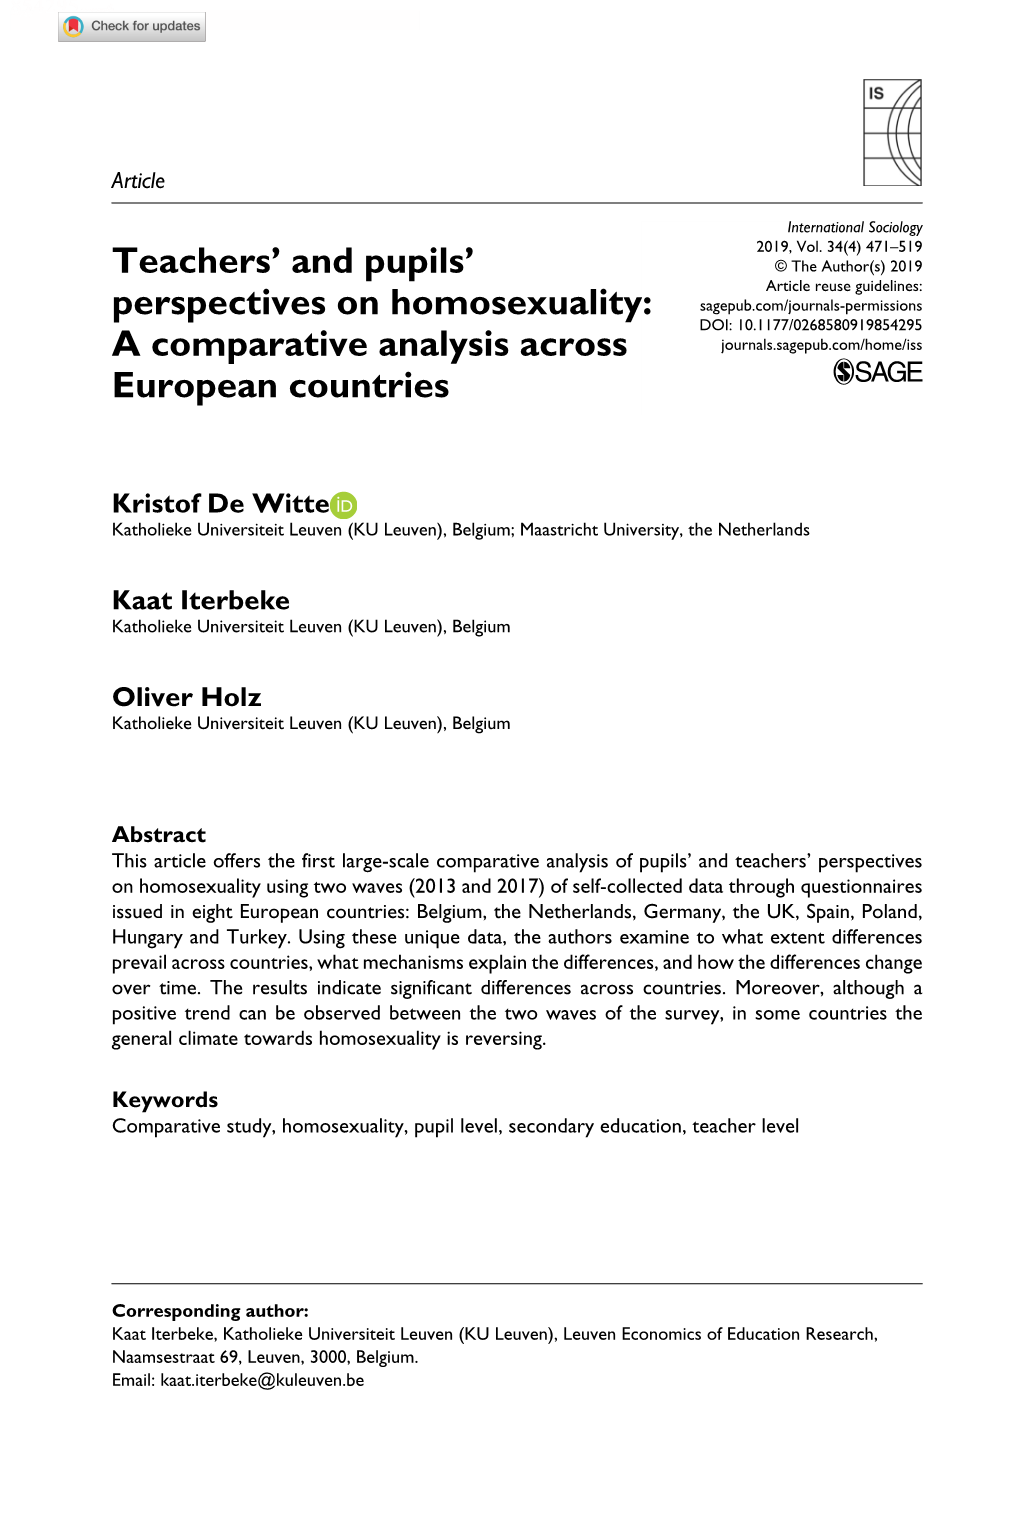 Teachers' and Pupils' Perspectives on Homosexuality: a Comparative